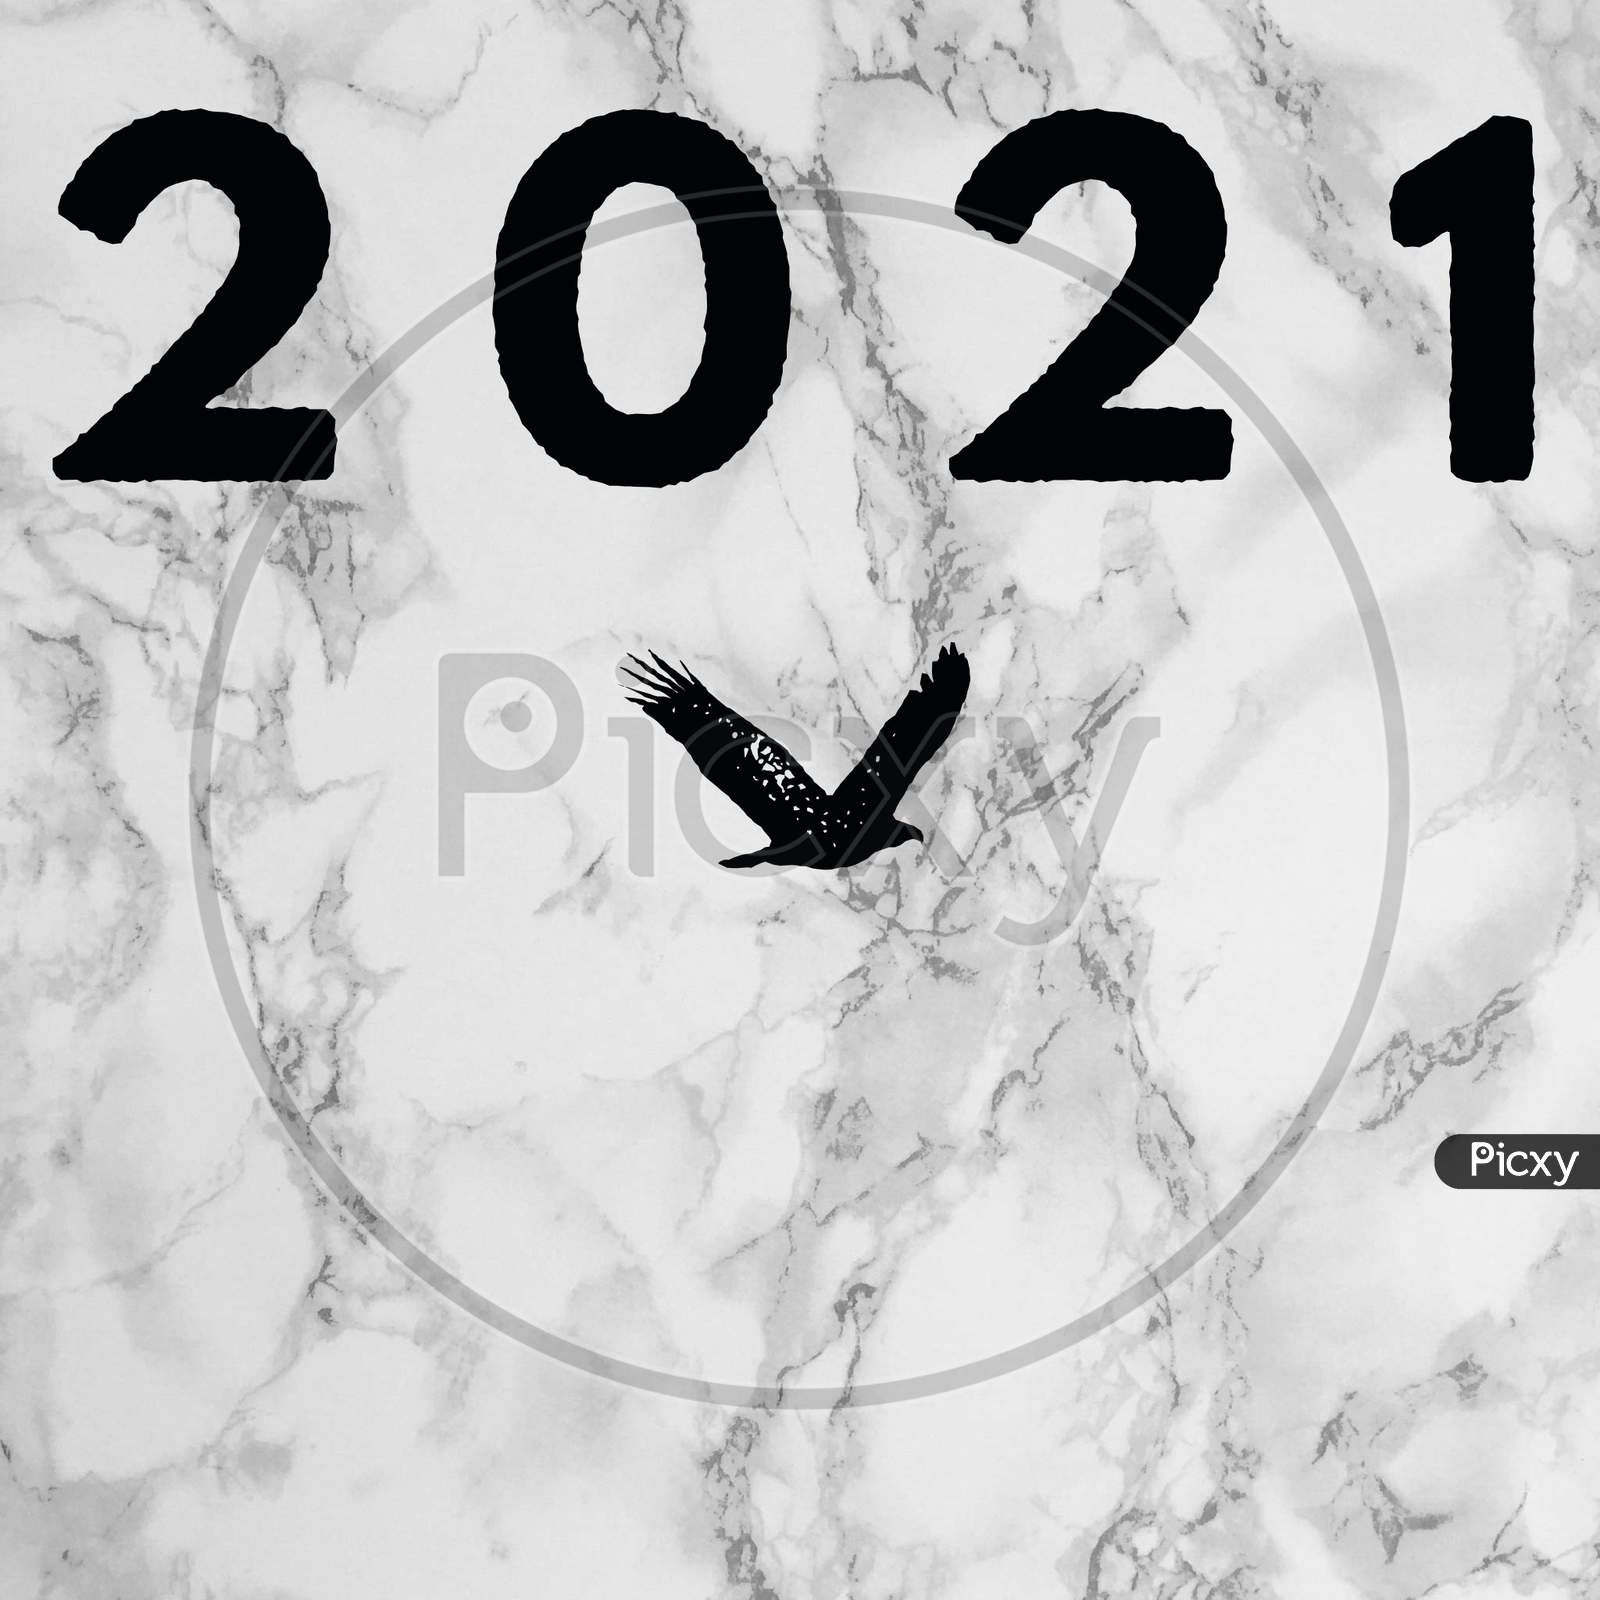 Image With A Text "2021" On Simple Grayish Background.